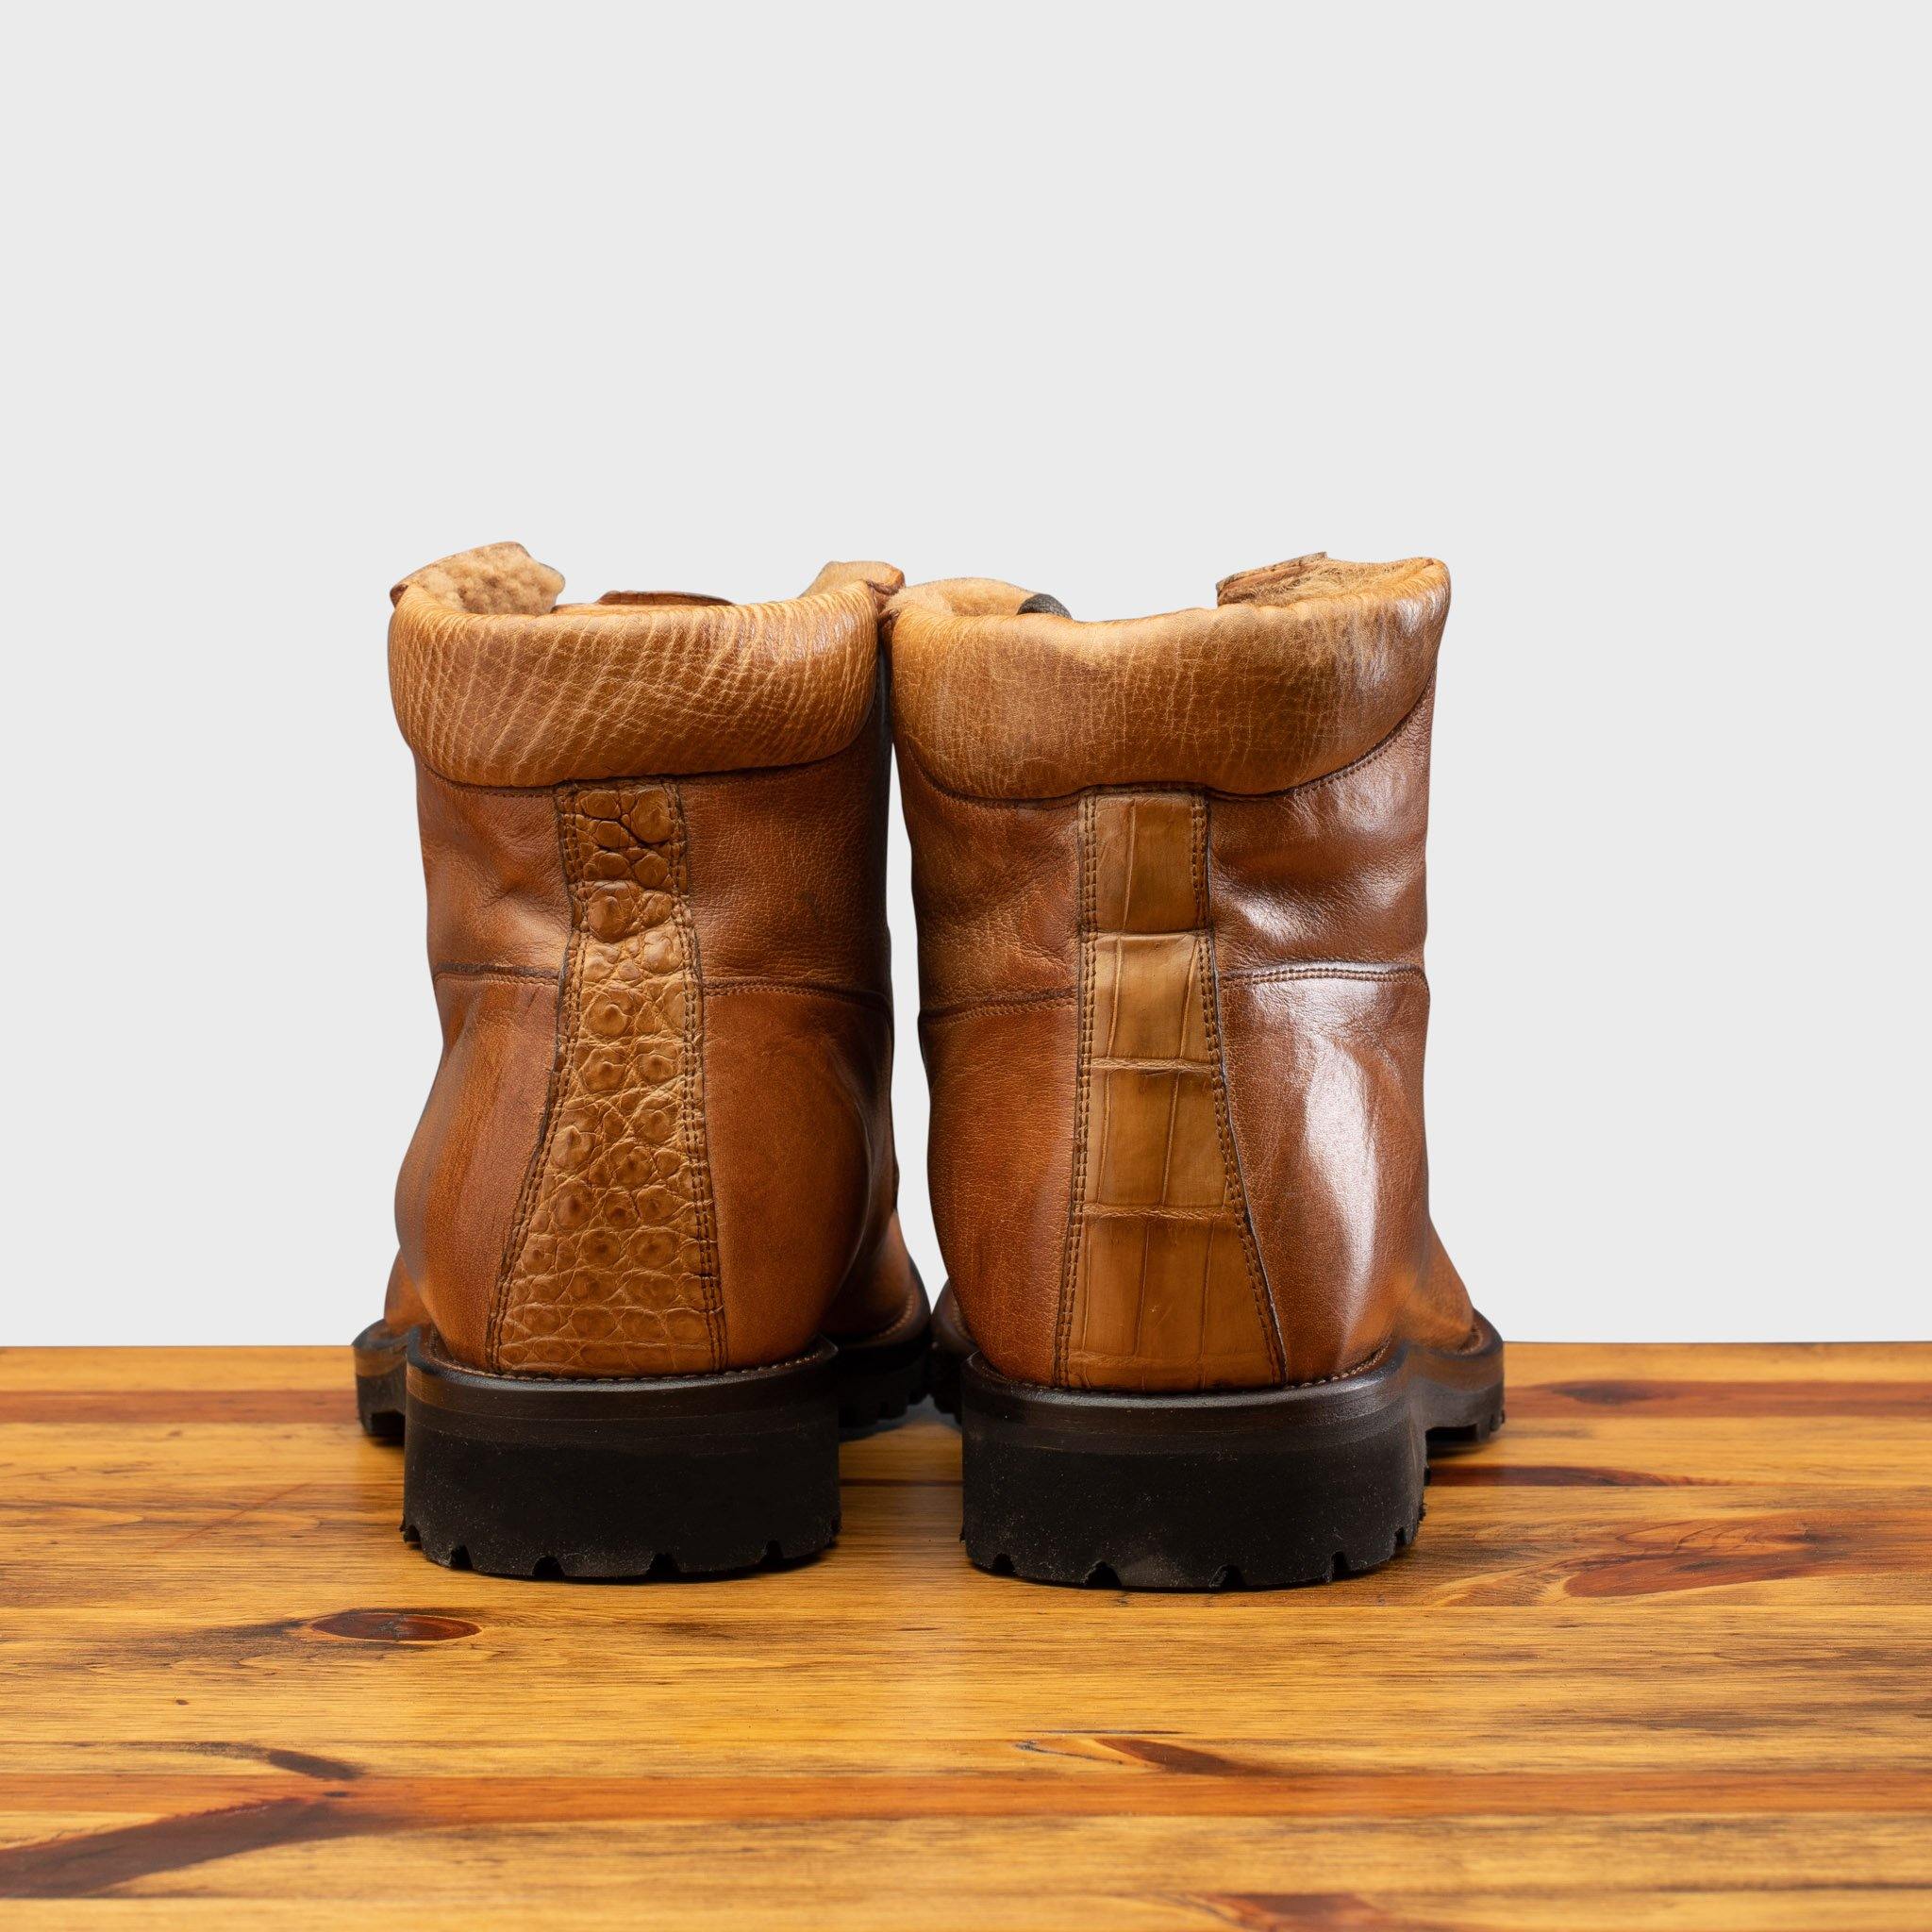 Back profile of the 3236 Calzoleria Toscana Brick Shearling Boot on top of a wooden table